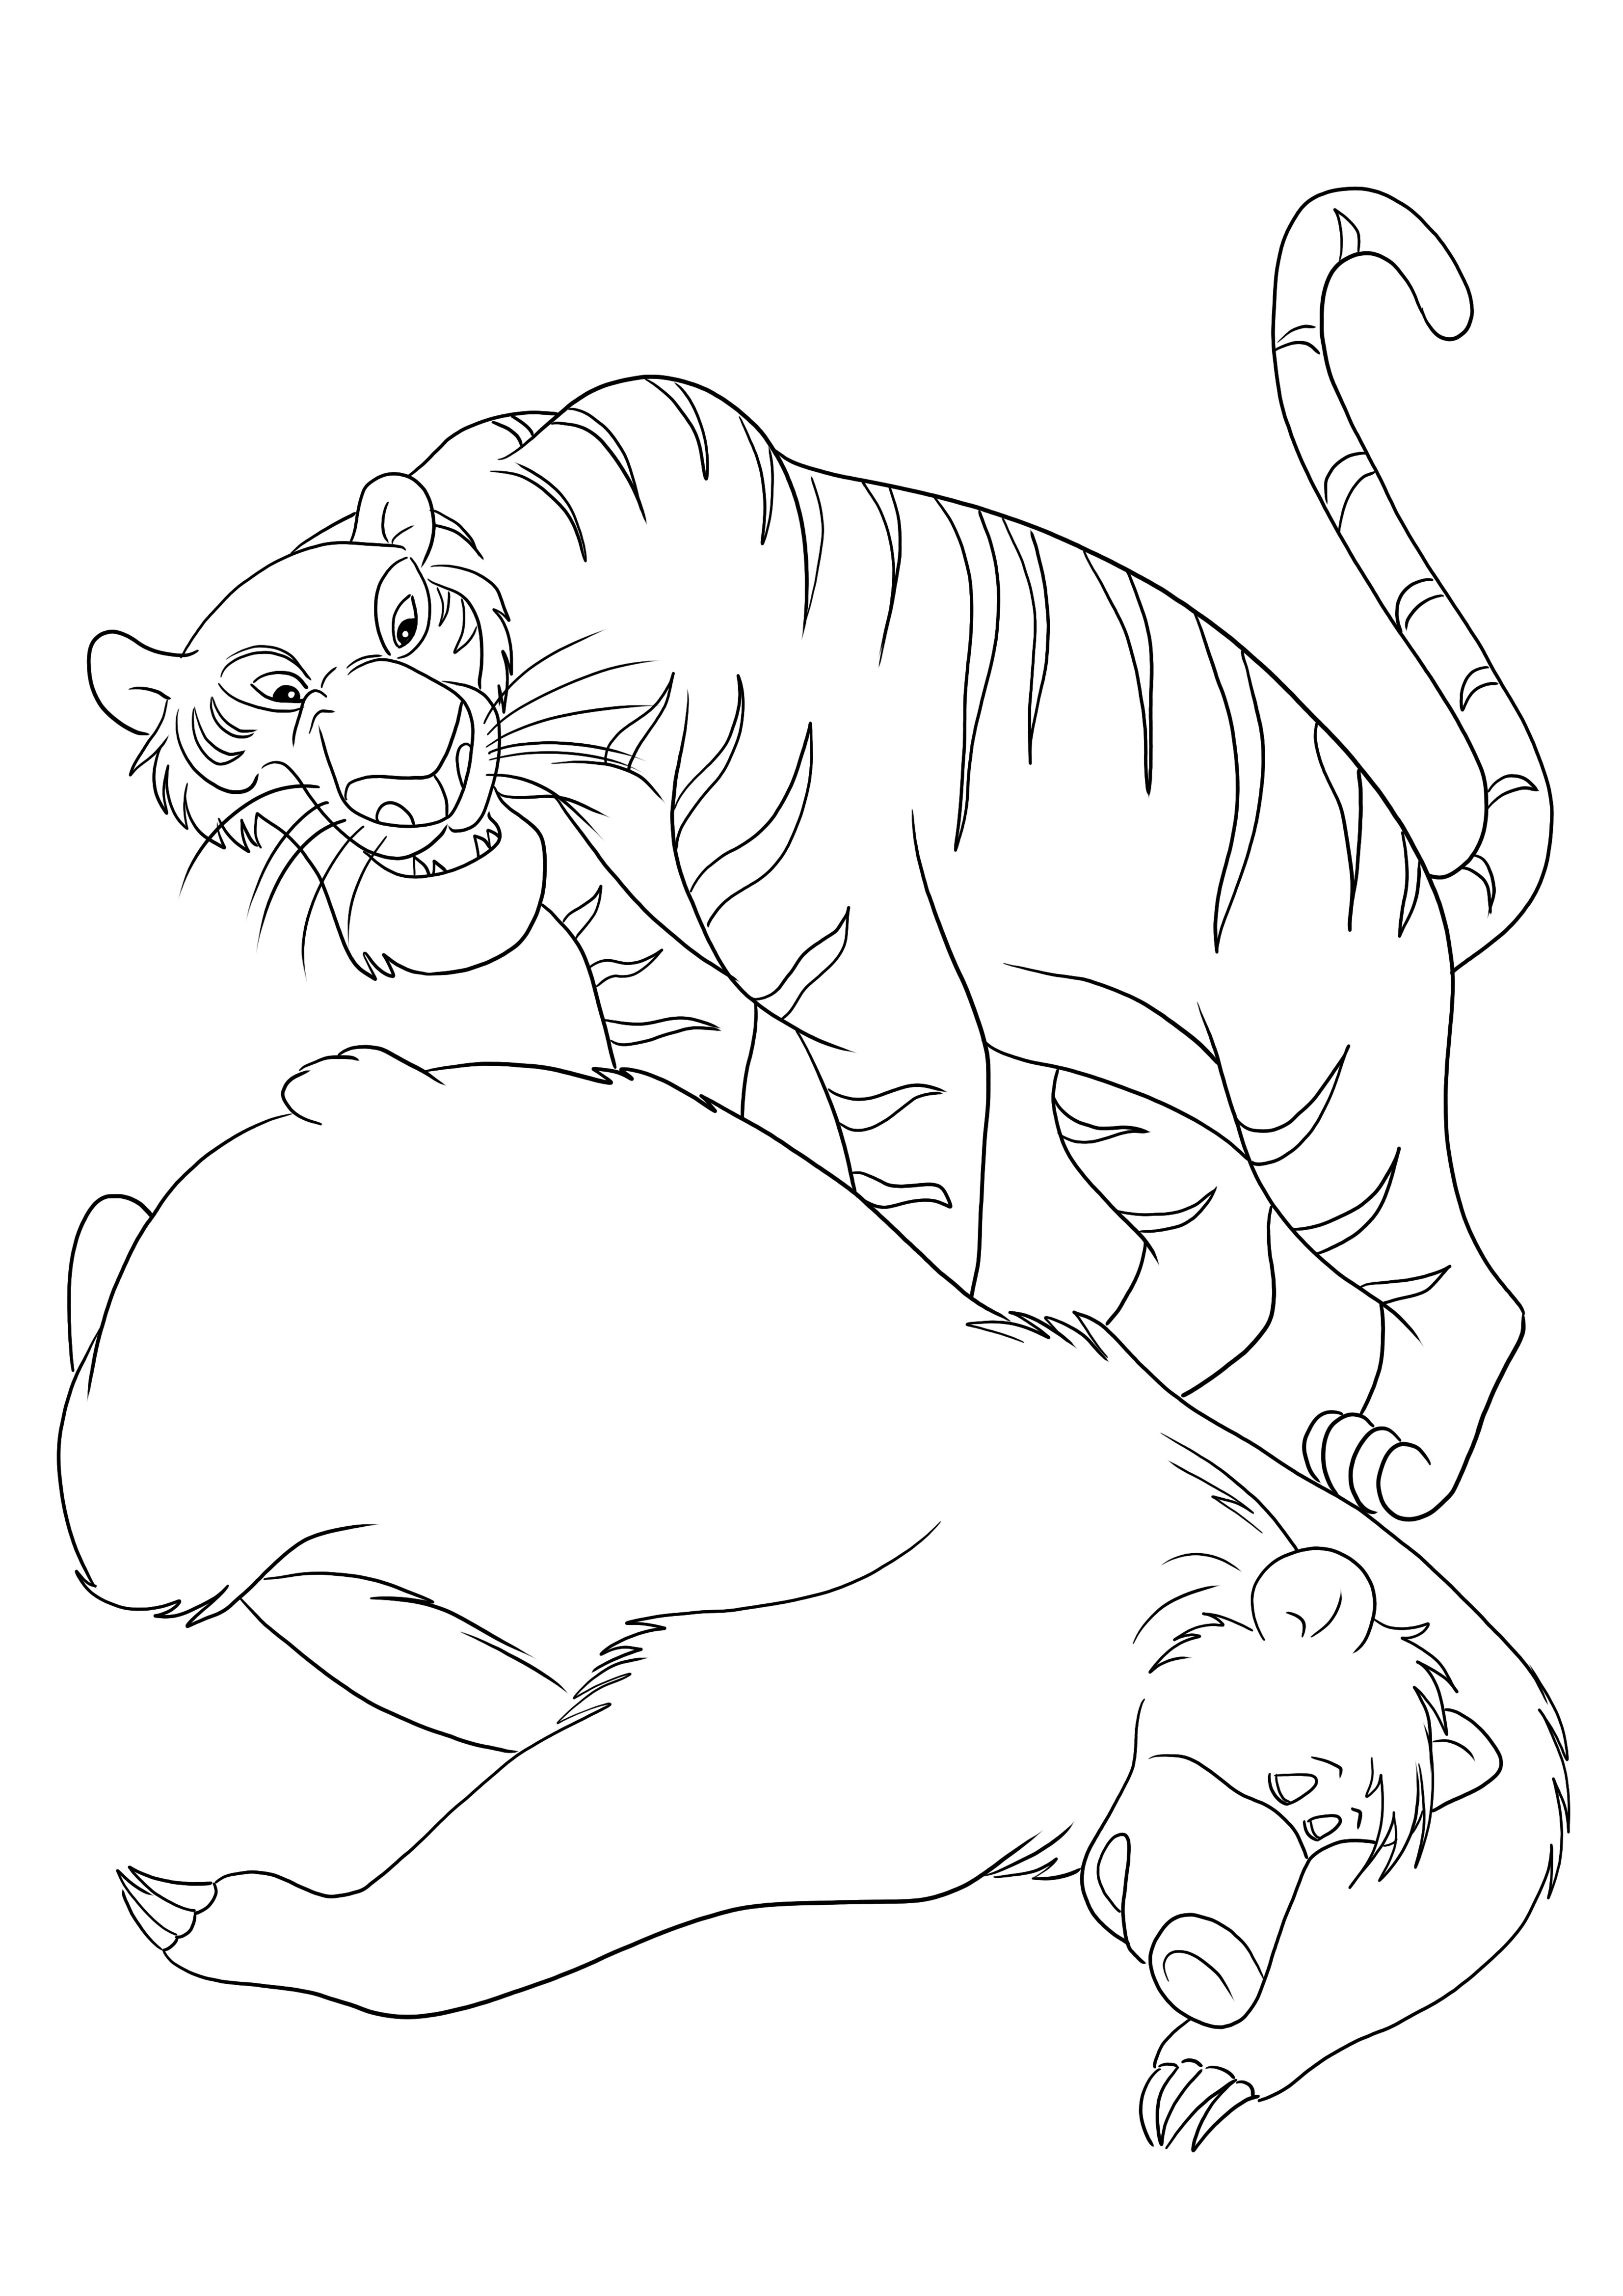 jungle book baloo coloring pages